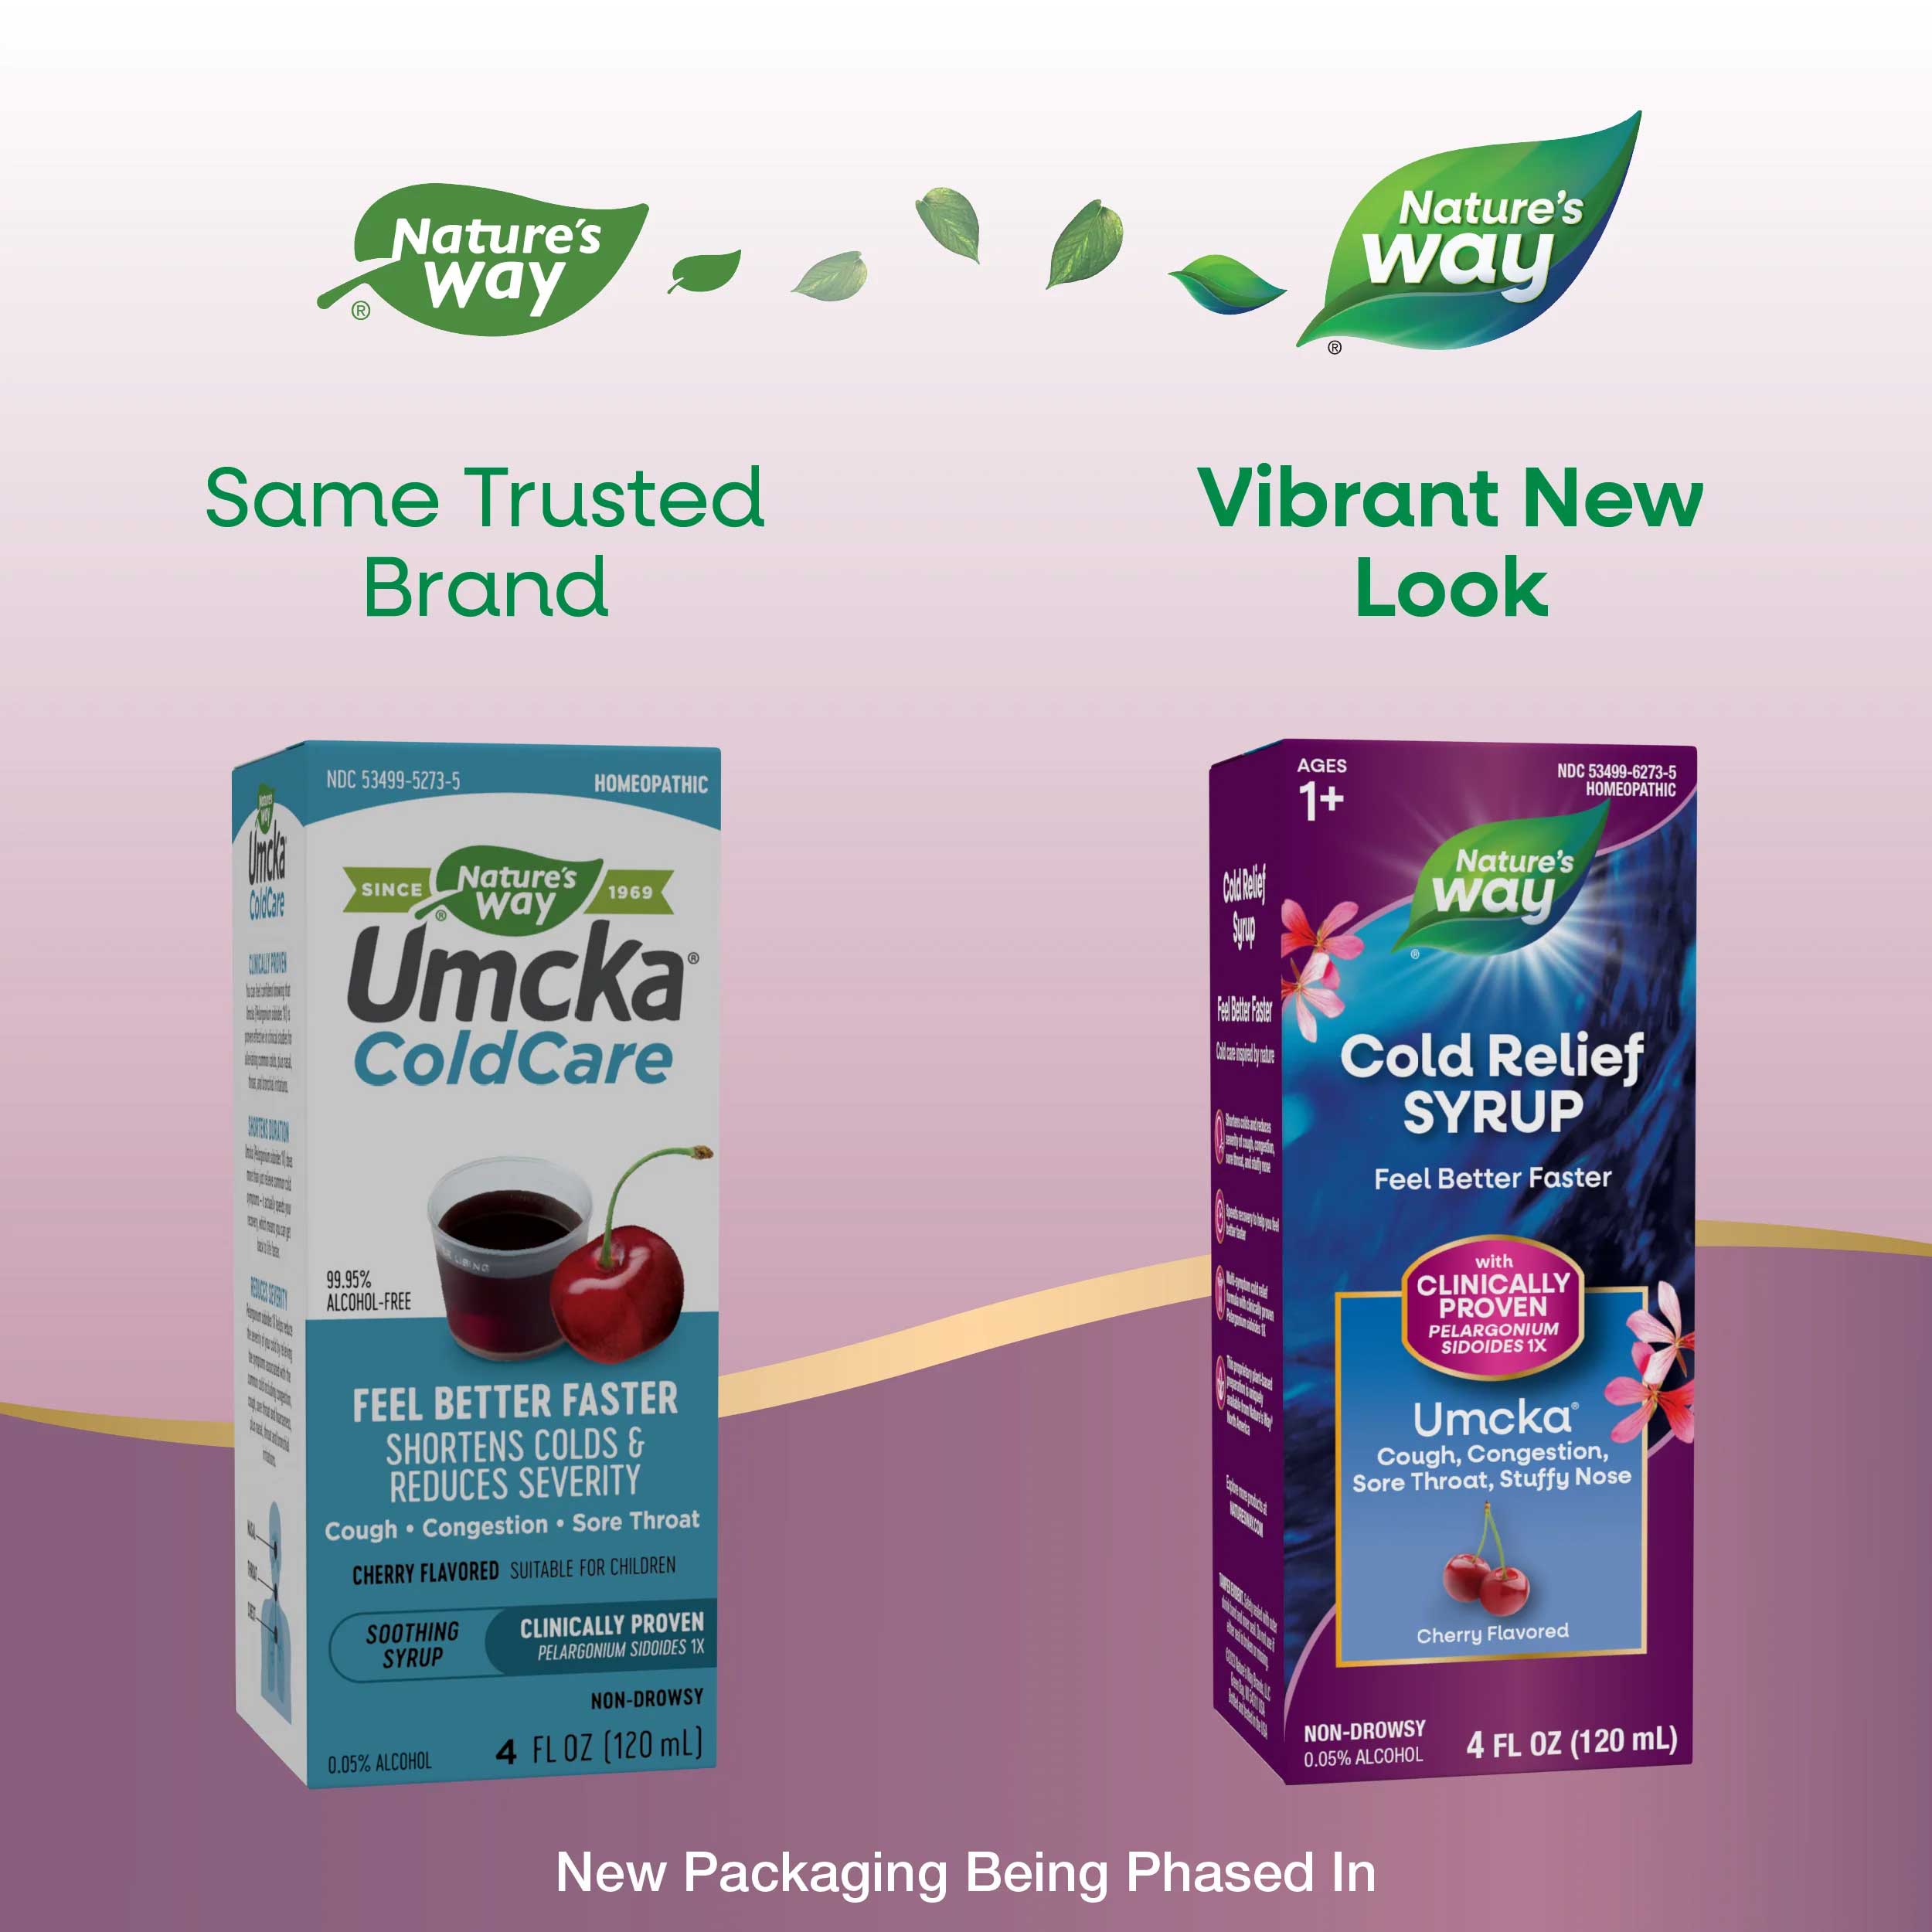 Nature's Way Cold Relief (Formerly Umcka ColdCare) Syrup (Cherry) New Look